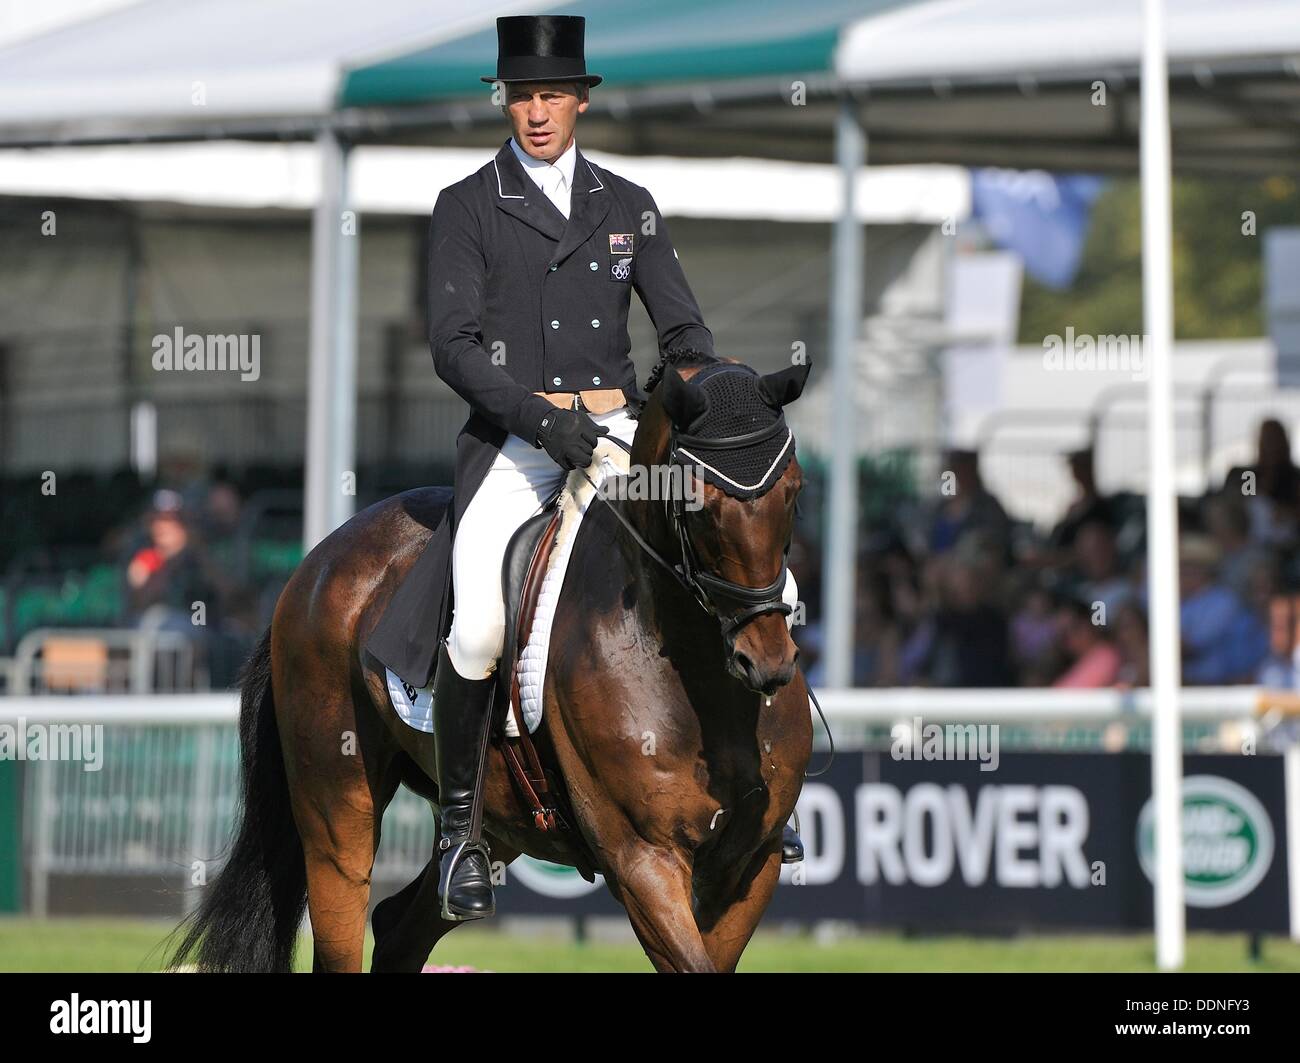 Stamford, England . 05th Sep, 2013.  Andrew Nicholson [NZL] riding CALICO JOE during the dressage phase on day 1 of The Land Rover Burghley Horse Trials.  The Land Rover Burghley Horse Trials take place between 5th - 8th September at Burghley House,© Stephen Bartholomew/Alamy Live News Credit:  Stephen Bartholomew/Alamy Live News Stock Photo